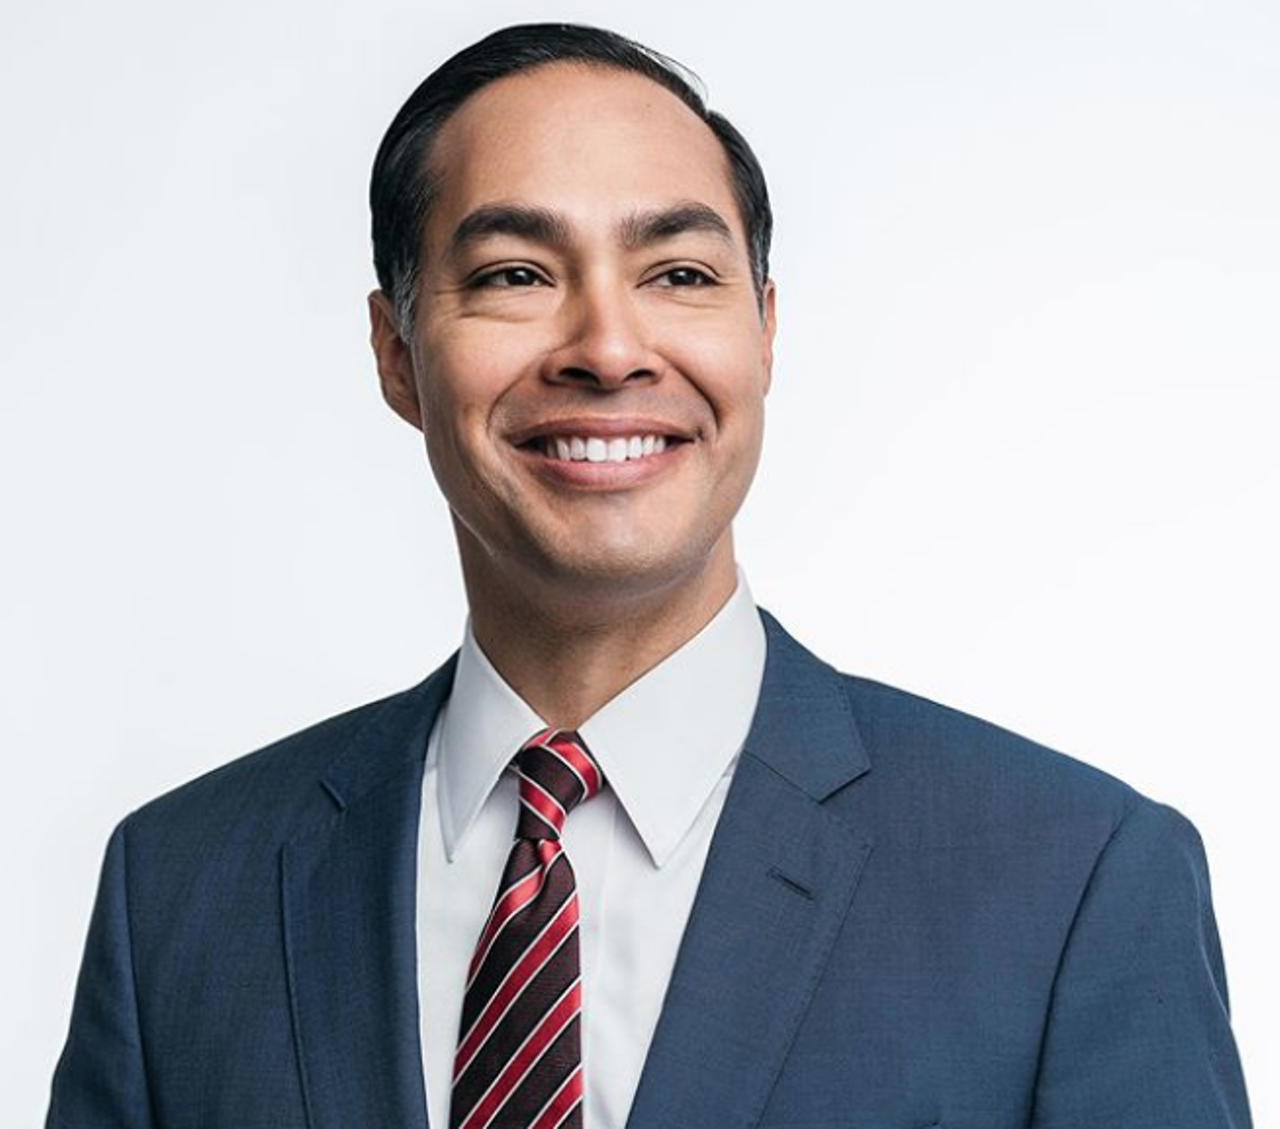 Julián Castro
You won’t need a lot to dress up as ole Julián— just a blue suit paired with his iconic facial expressions and hand gestures. If you’re really going all out, take some of his campaign slogans and promises to really sell your getup.
Photo via Instagram / juliancastrotx